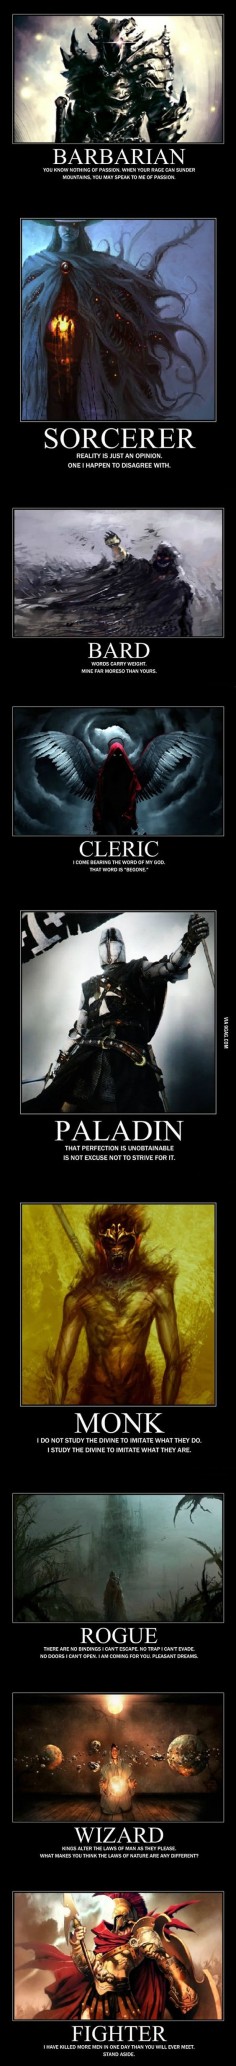 If i had to choose, monk, rogue, or paladin. Those 3 have always been my favorite 3 class in any game with a class system